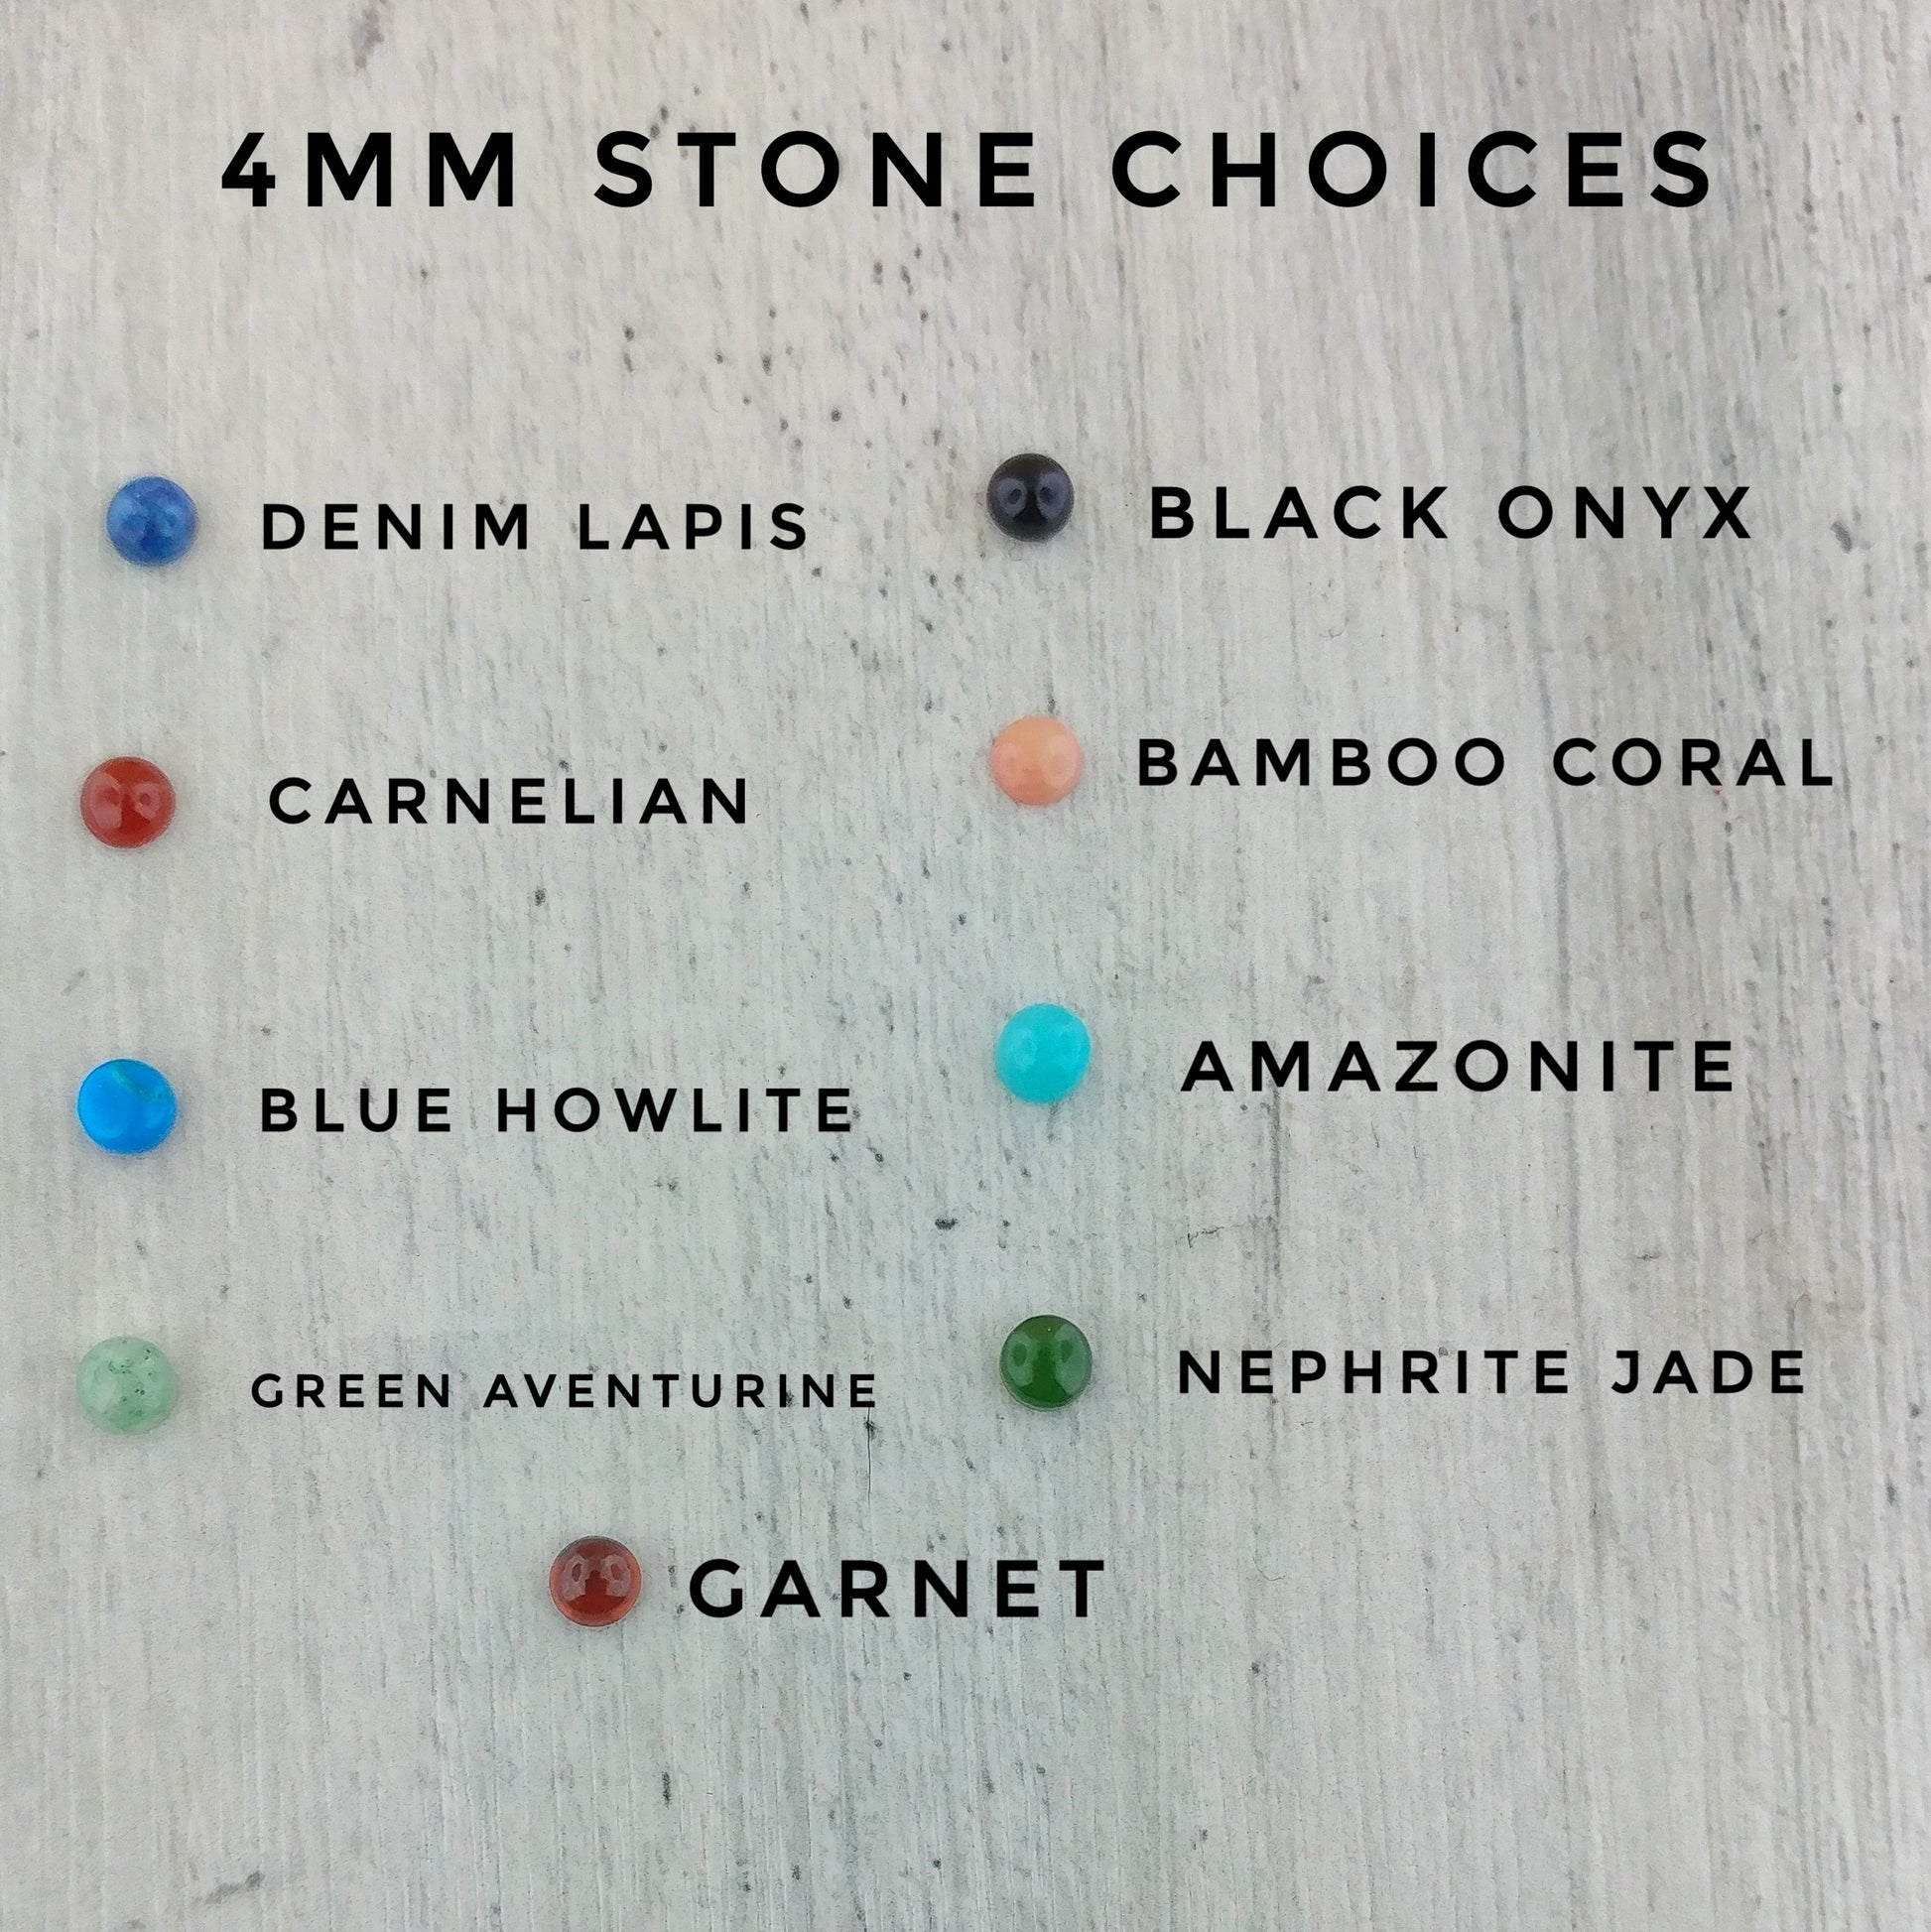 Stone color choices for eyes